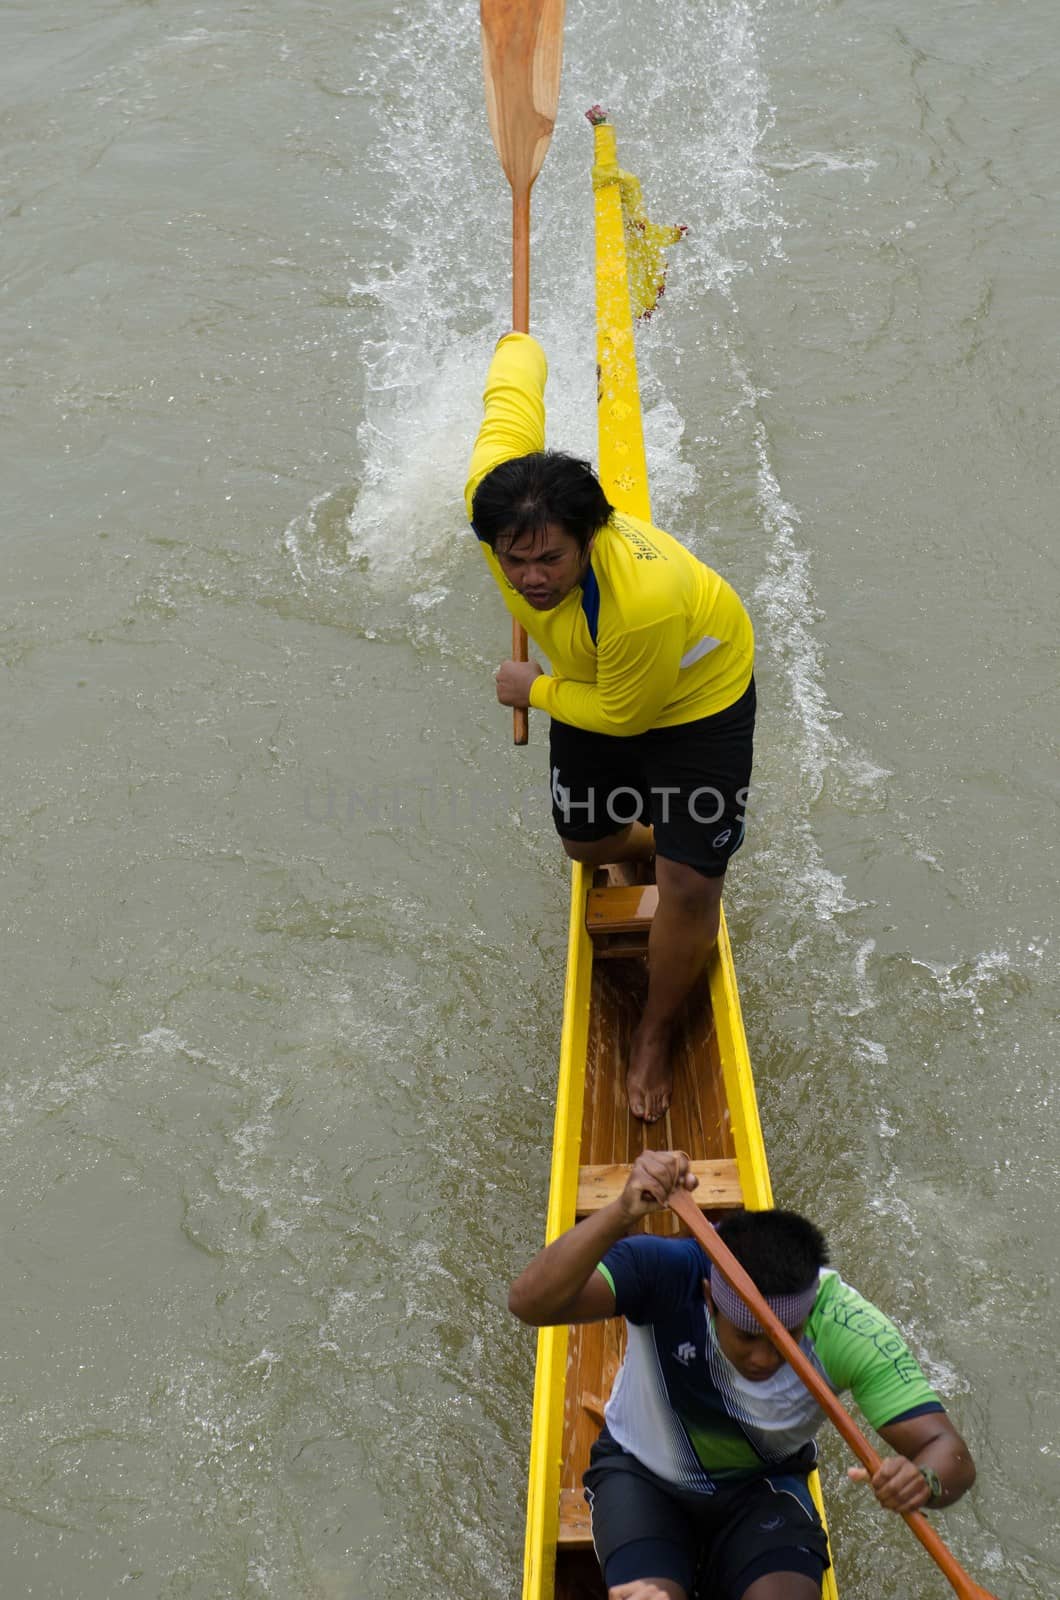 Petchaburi, THAILAND - October 7 : Participants in the Petchaburi Long Boat Competition 2012 on October 7, 2012 in The Petchaburi river ,Petchaburi Province, Thailand. 